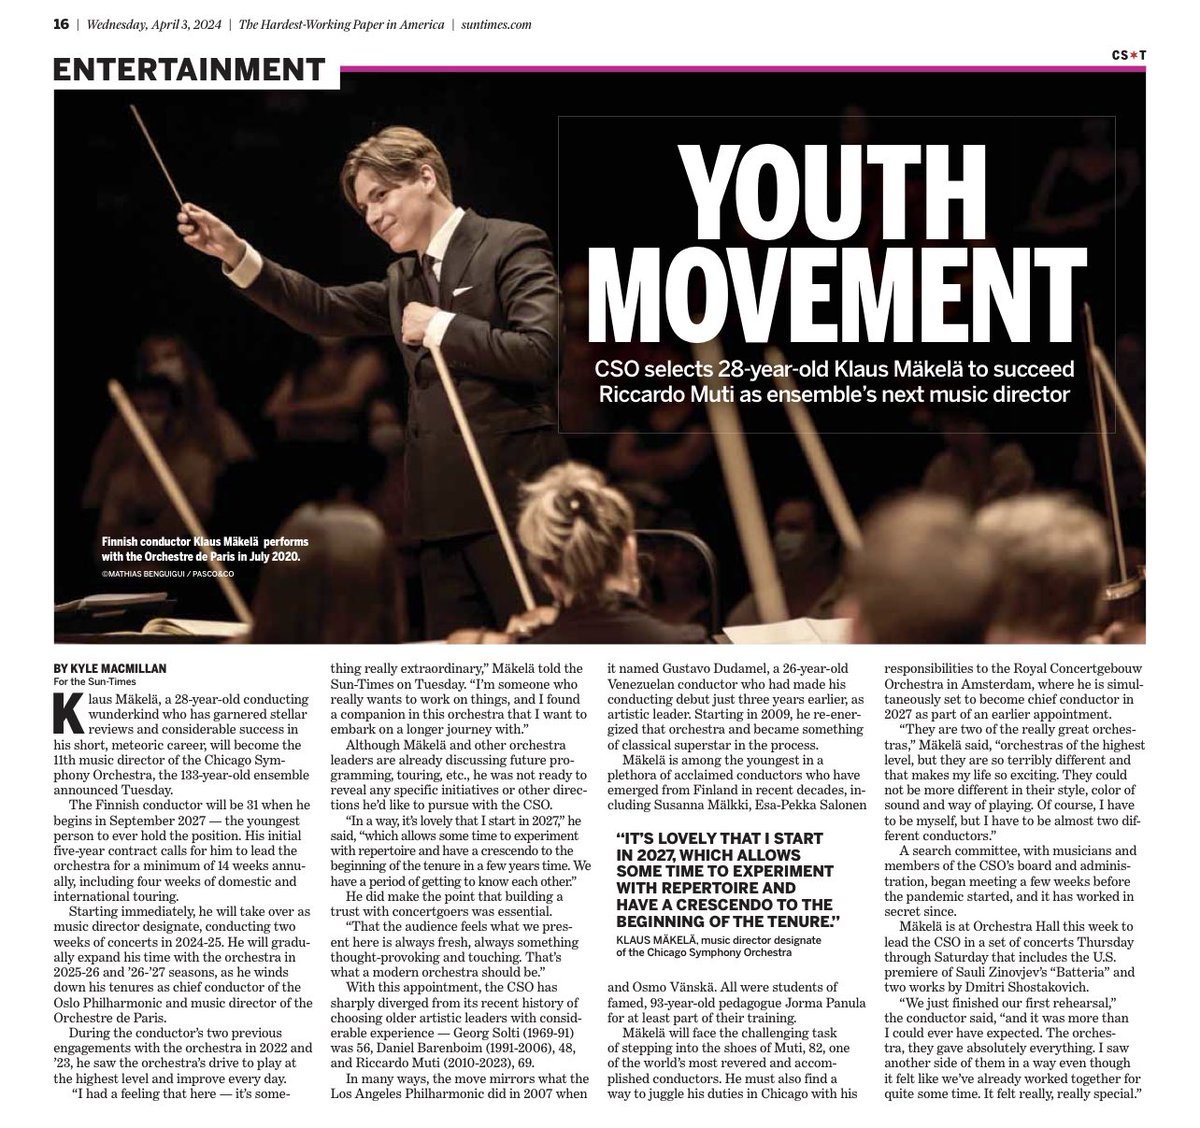 Looking forward to welcoming wunderkind @klausmakela to #Chicago as the new music director of @chicagosymphony in 2027! You can catch him this weekend guest conducting at symphony center.